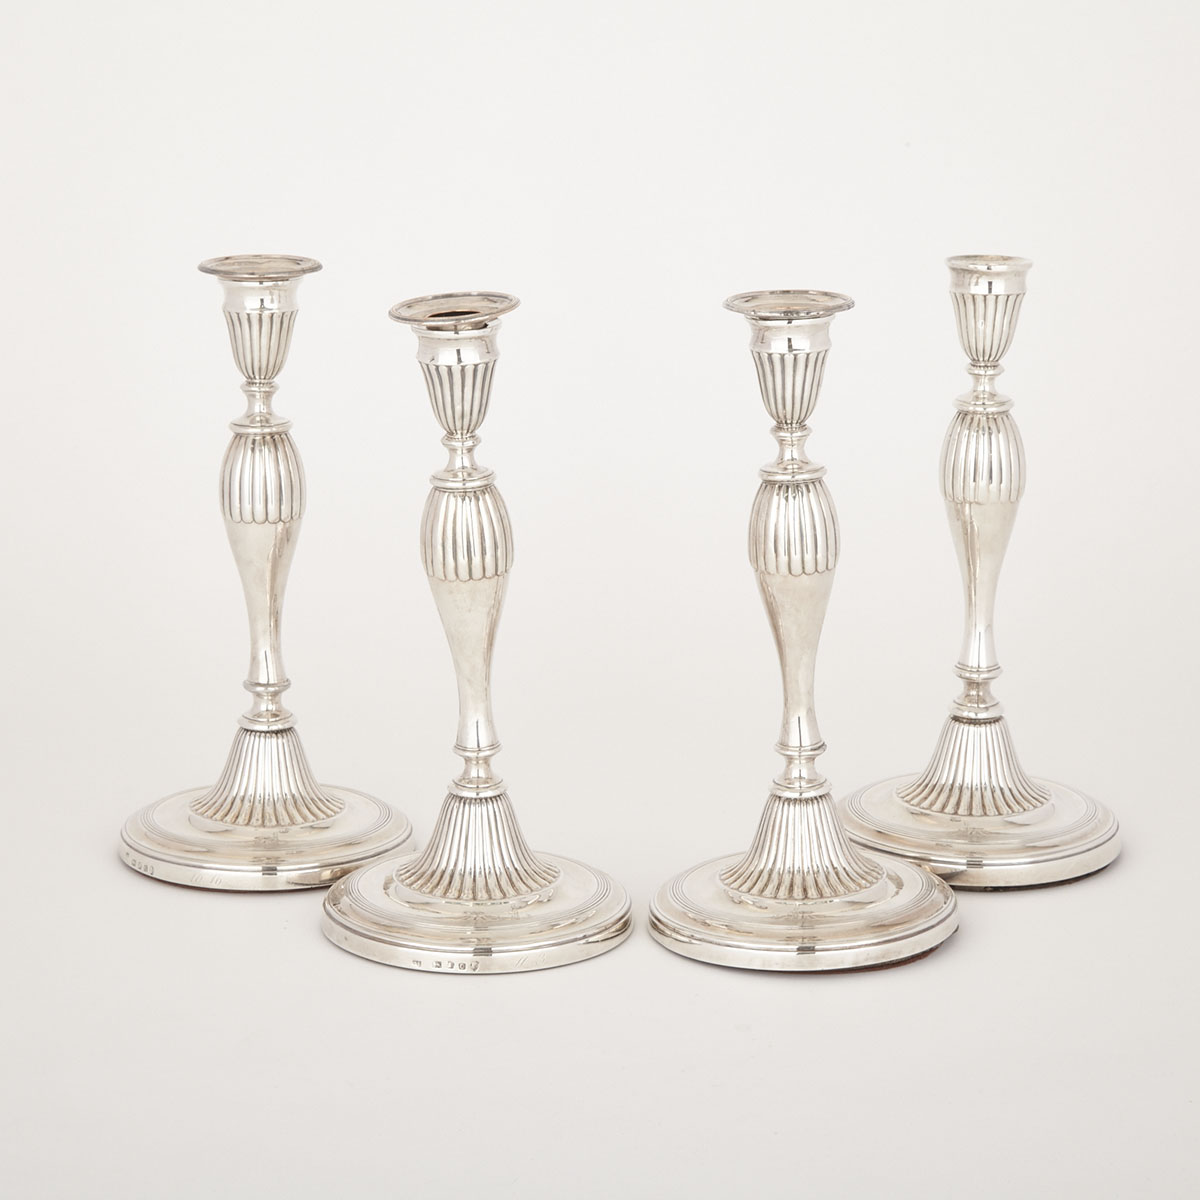 Set of Four George III Silver Table Candlesticks, Sheffield, 1795/98